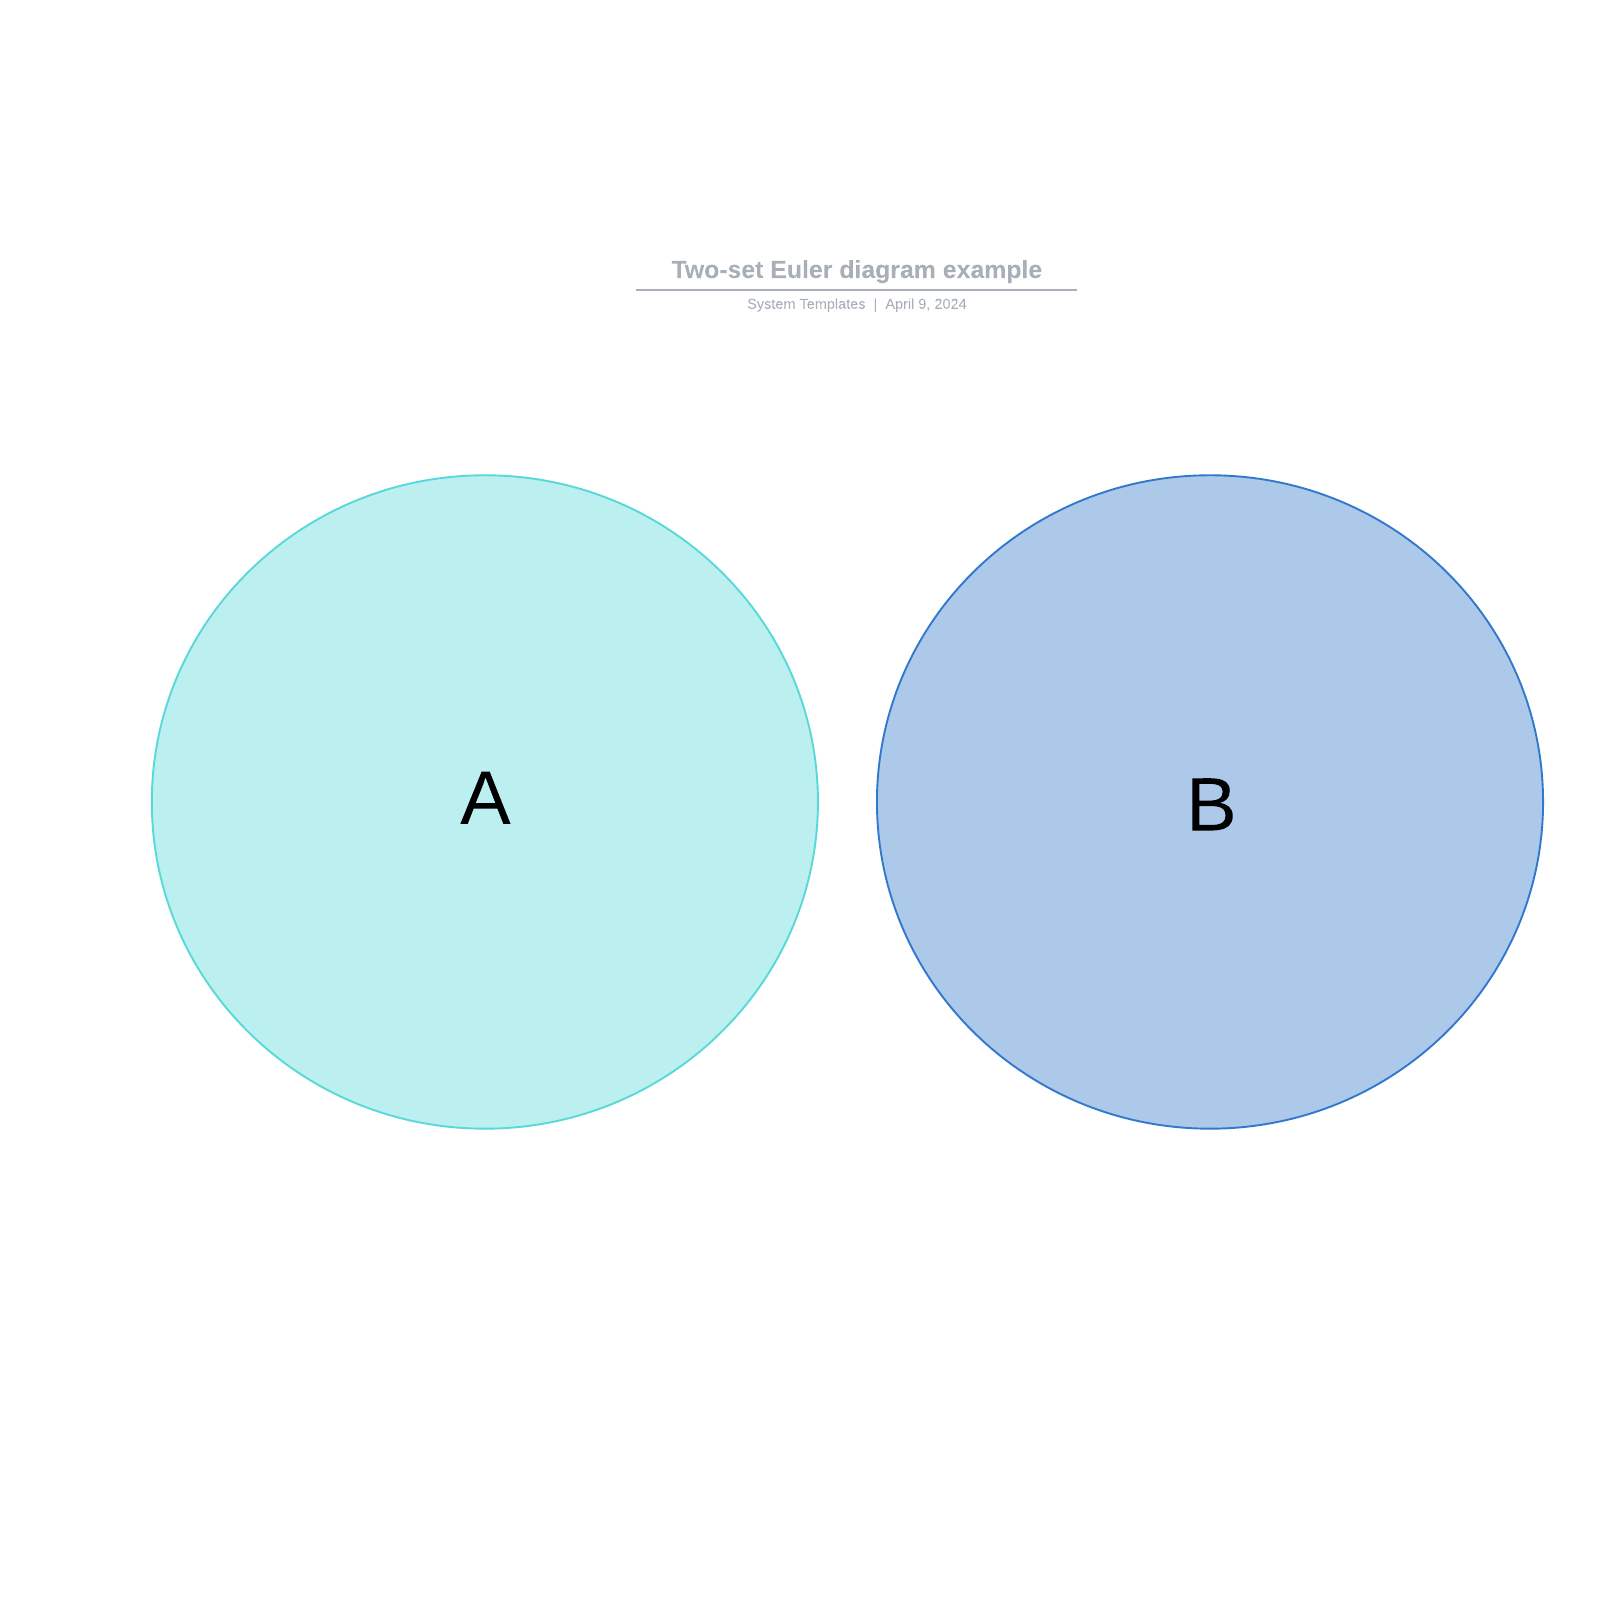 Two-set Euler diagram example example